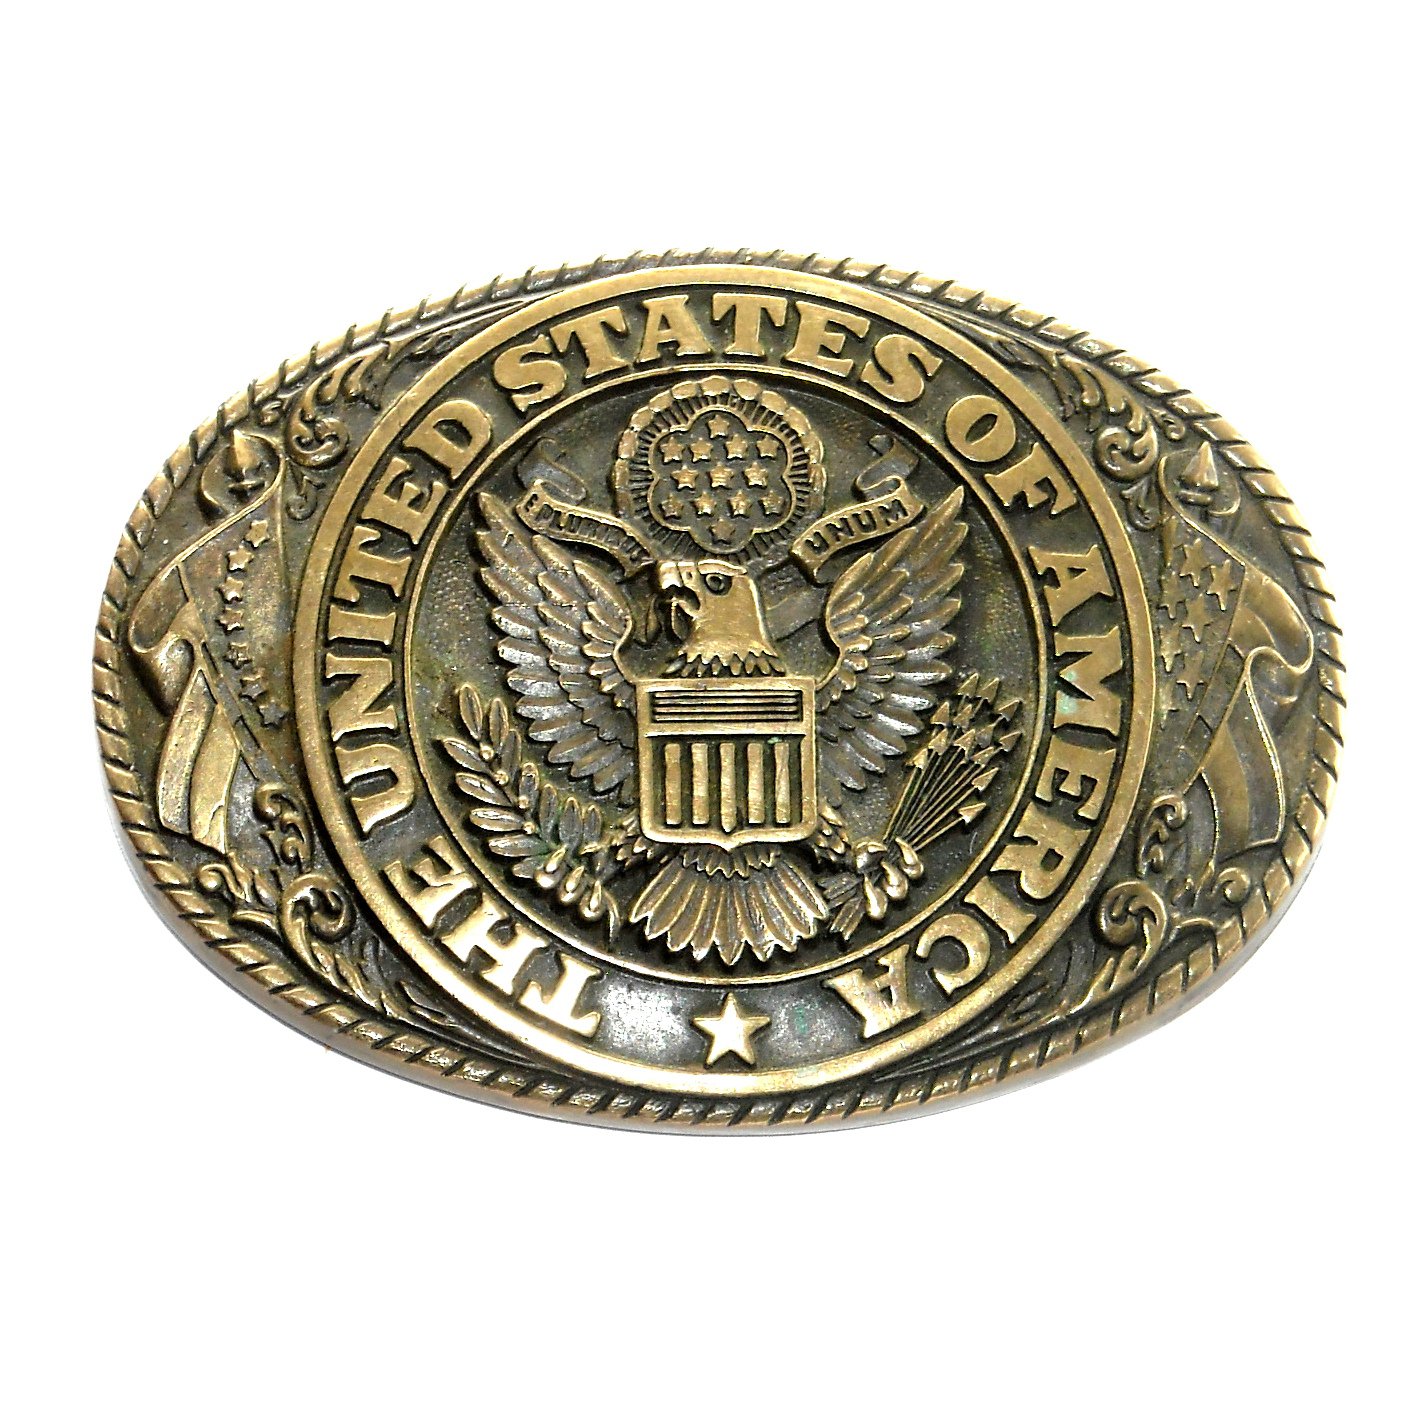 United States Of America Seal Vintage Tony Lama Solid Brass Belt Buckle